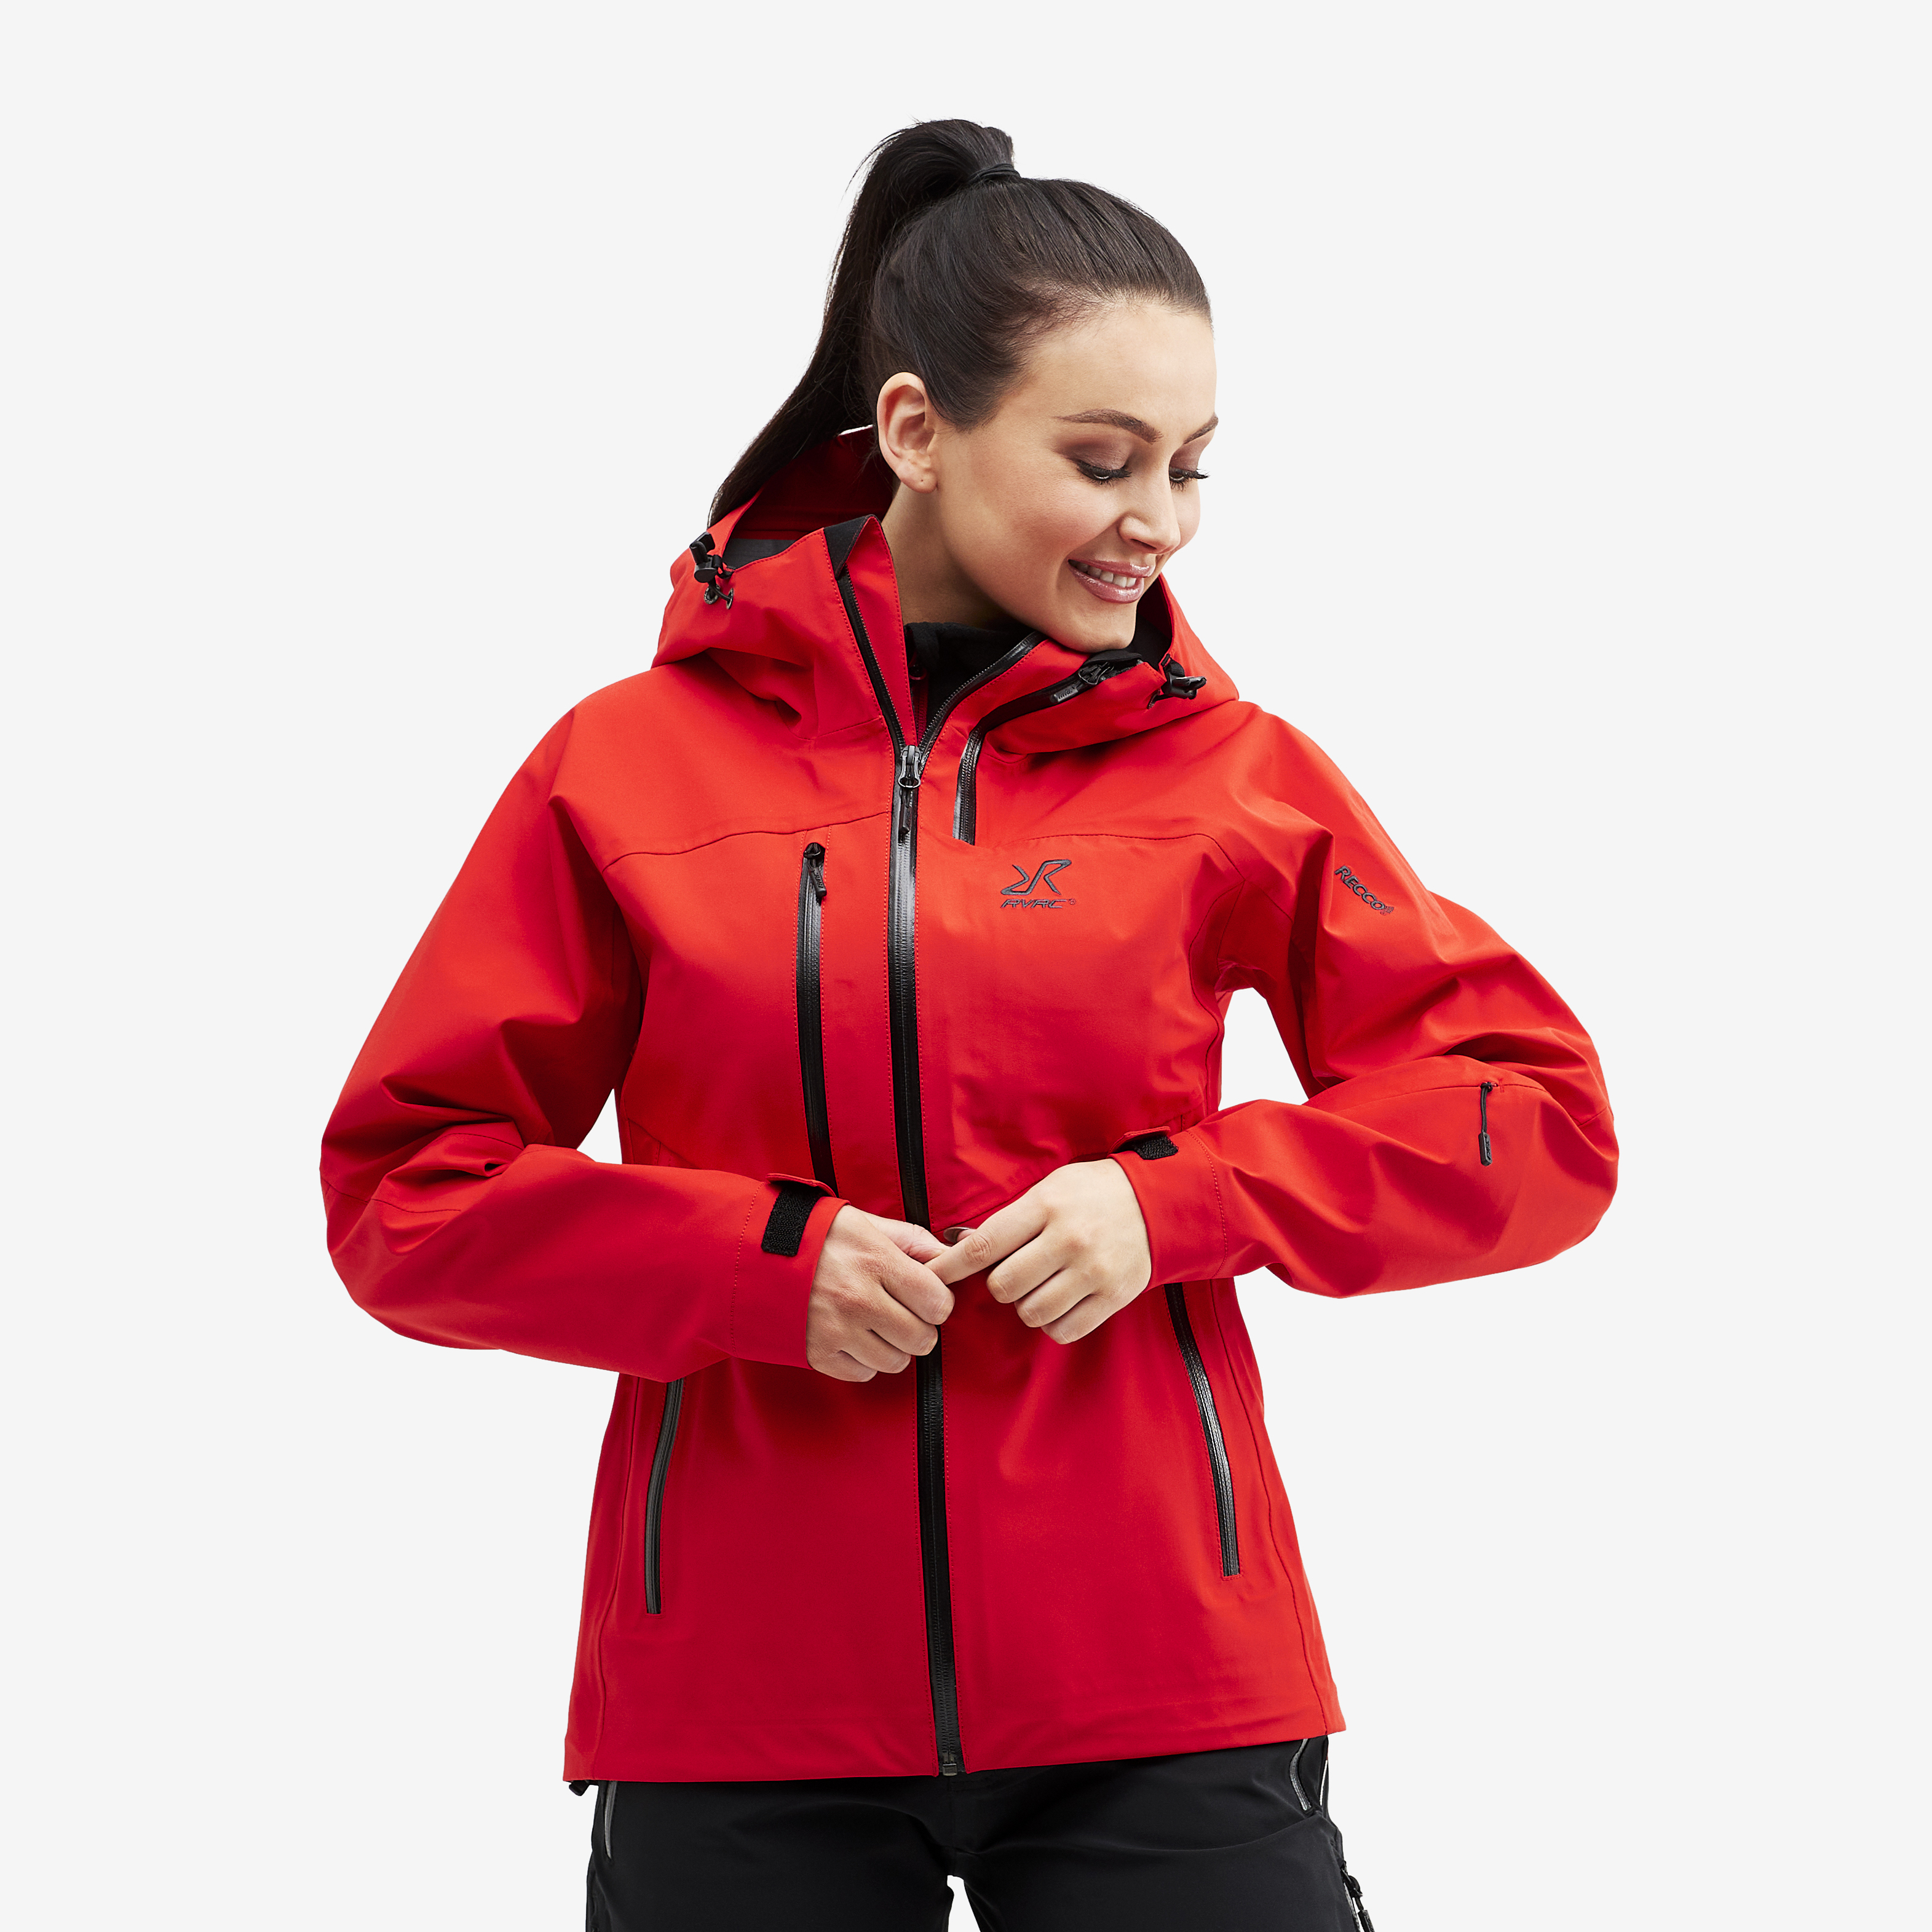 Cyclone Rescue Jacket 2.0 Flame Scarlet Dam